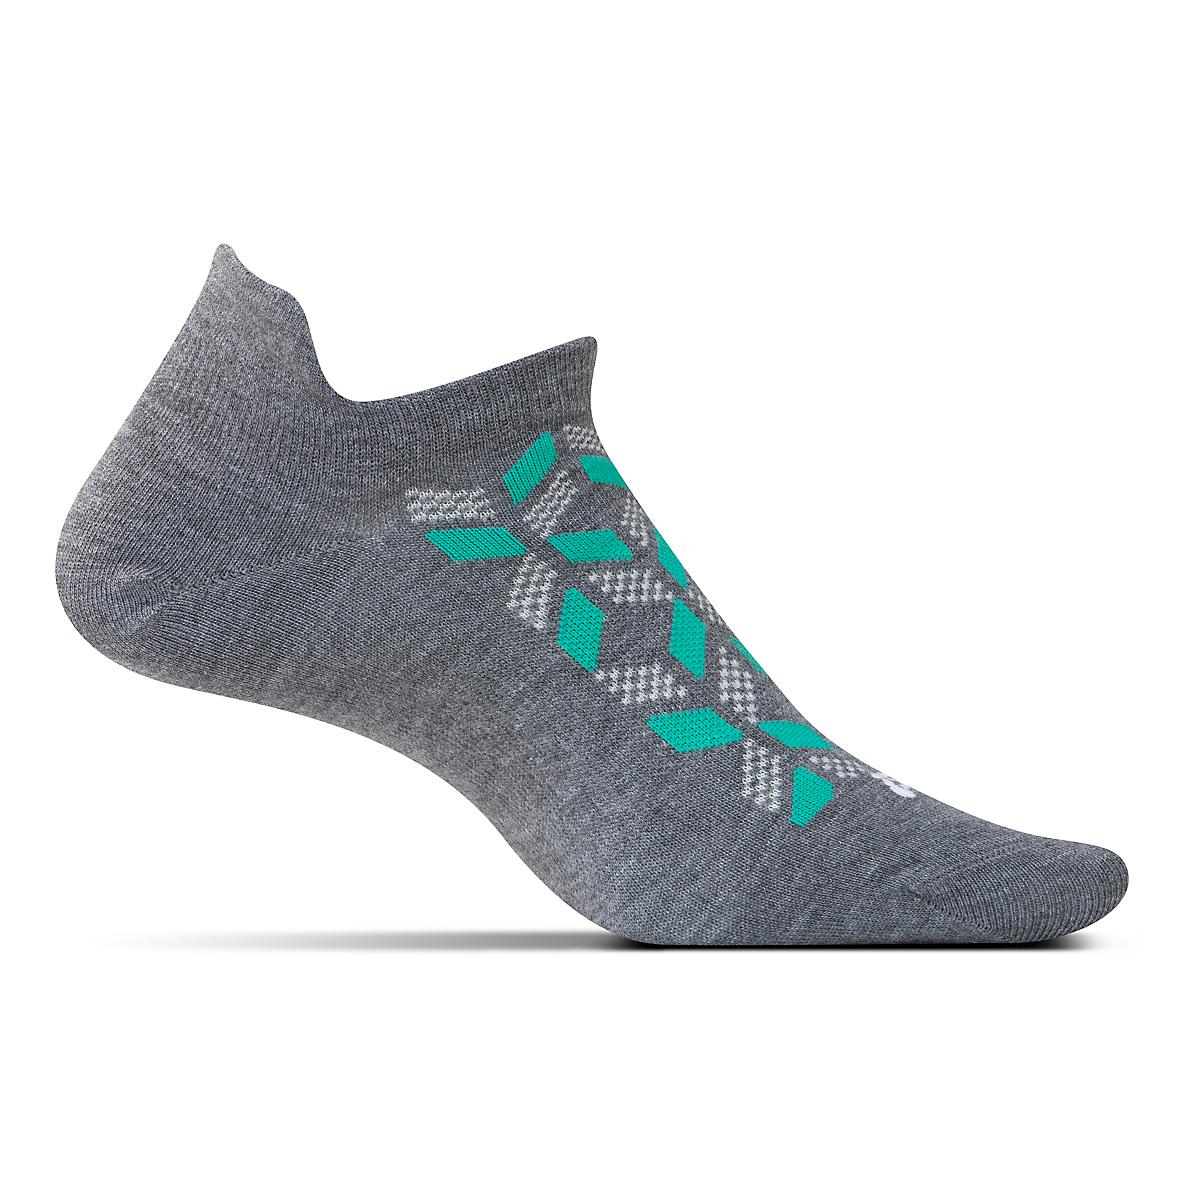 De Soto Compression Recovery V2 Socks at Road Runner Sports